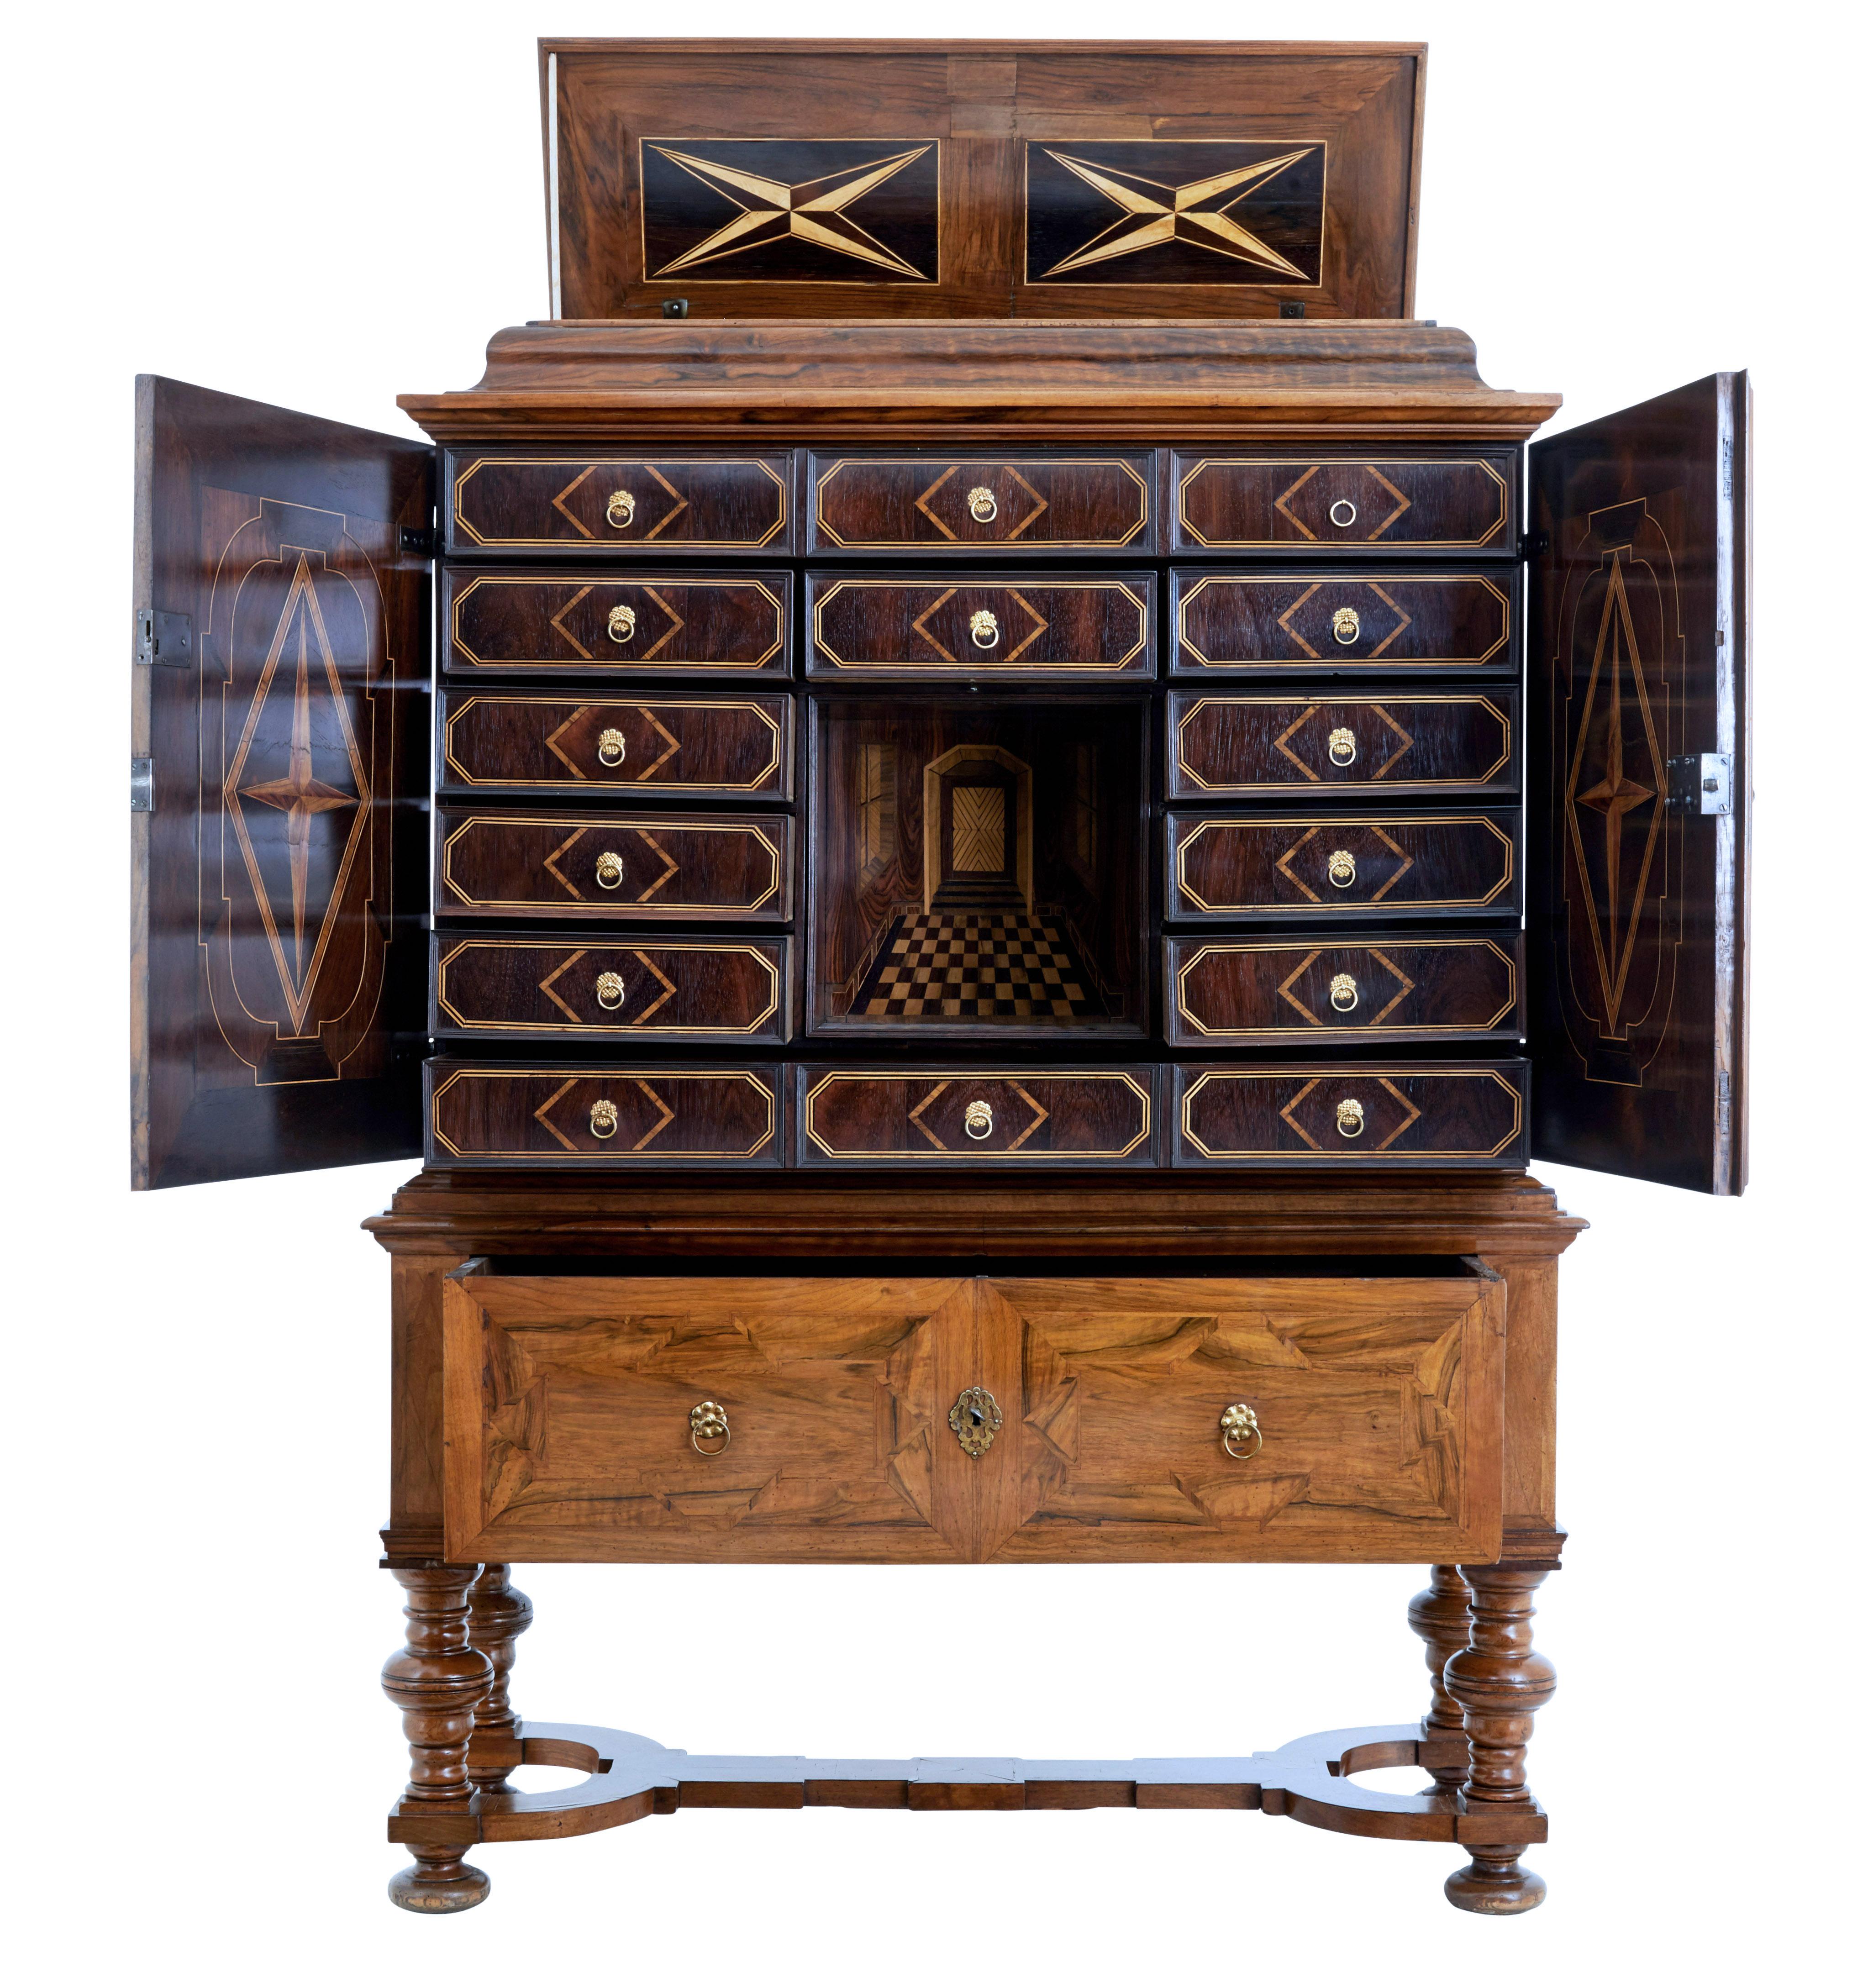 Inlay Early 18th Century Swedish Baroque Walnut Cabinet on Stand